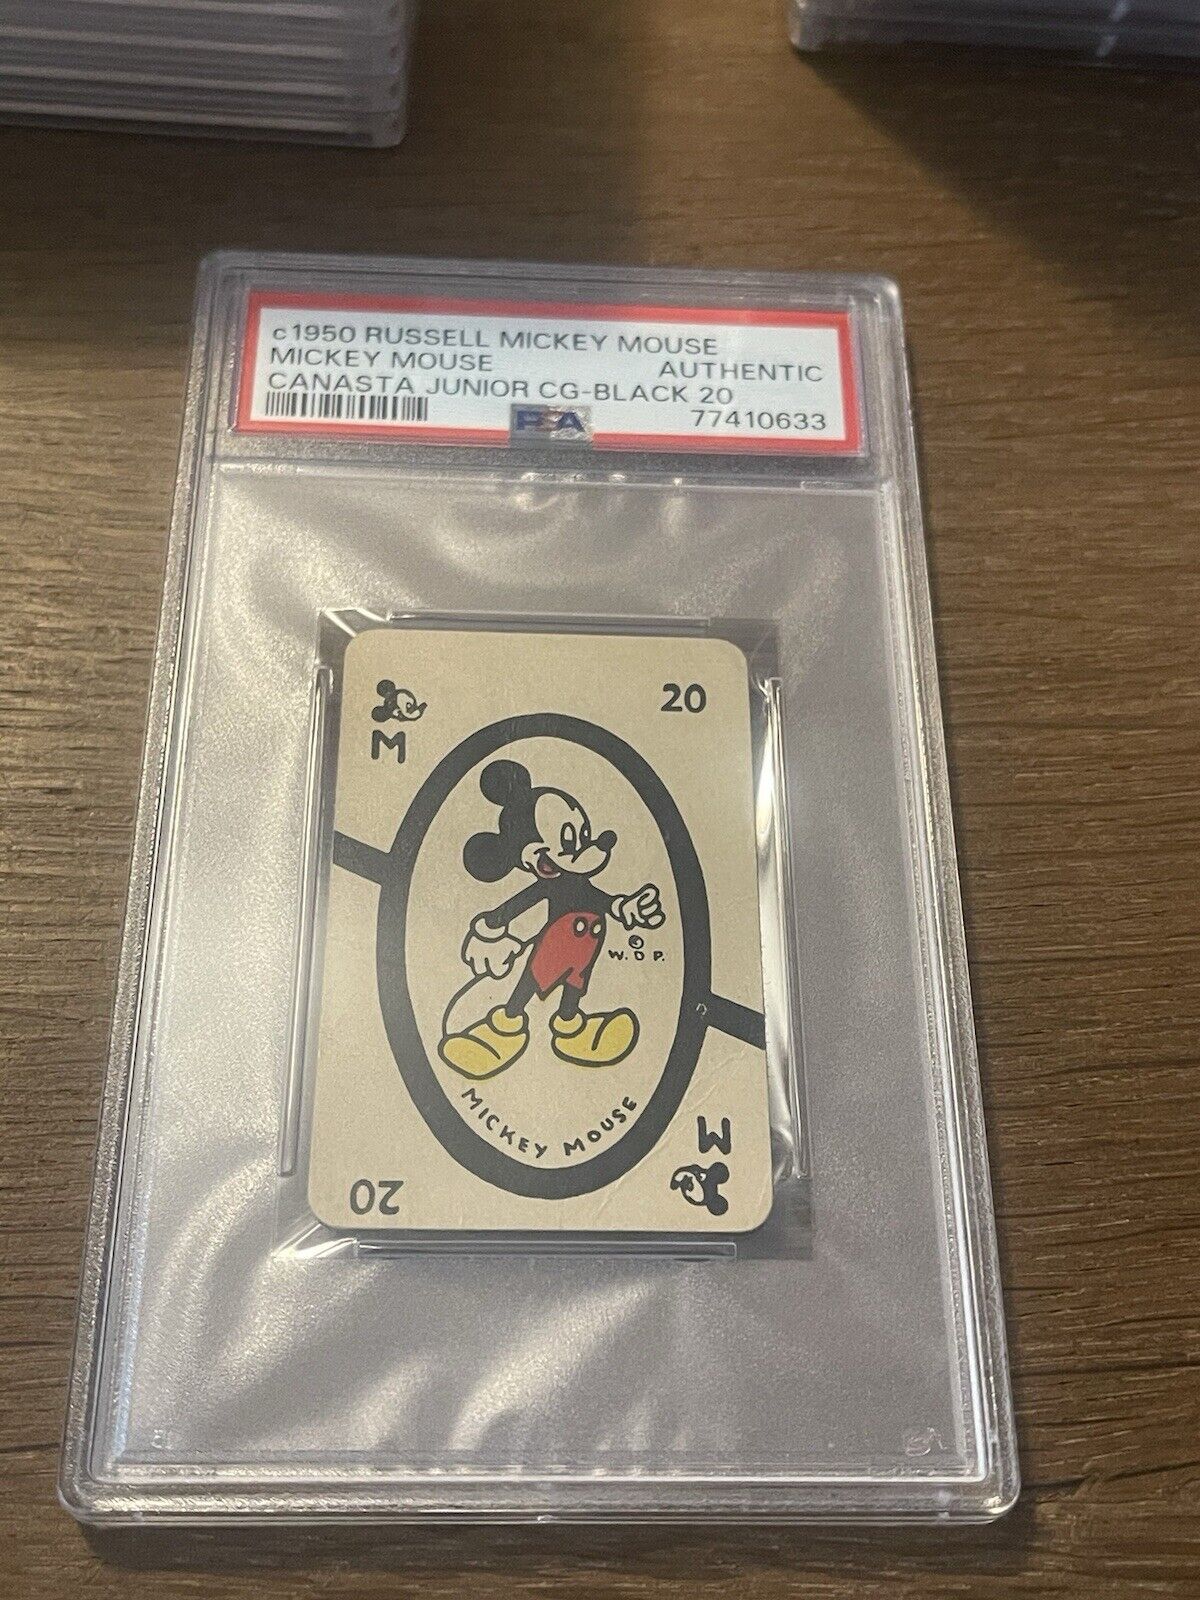 1950 WALT DISNEY PRODUCTIONS 🎥 MICKEY MOUSE CARD GAME PLAYING CARD PSA AUTH.